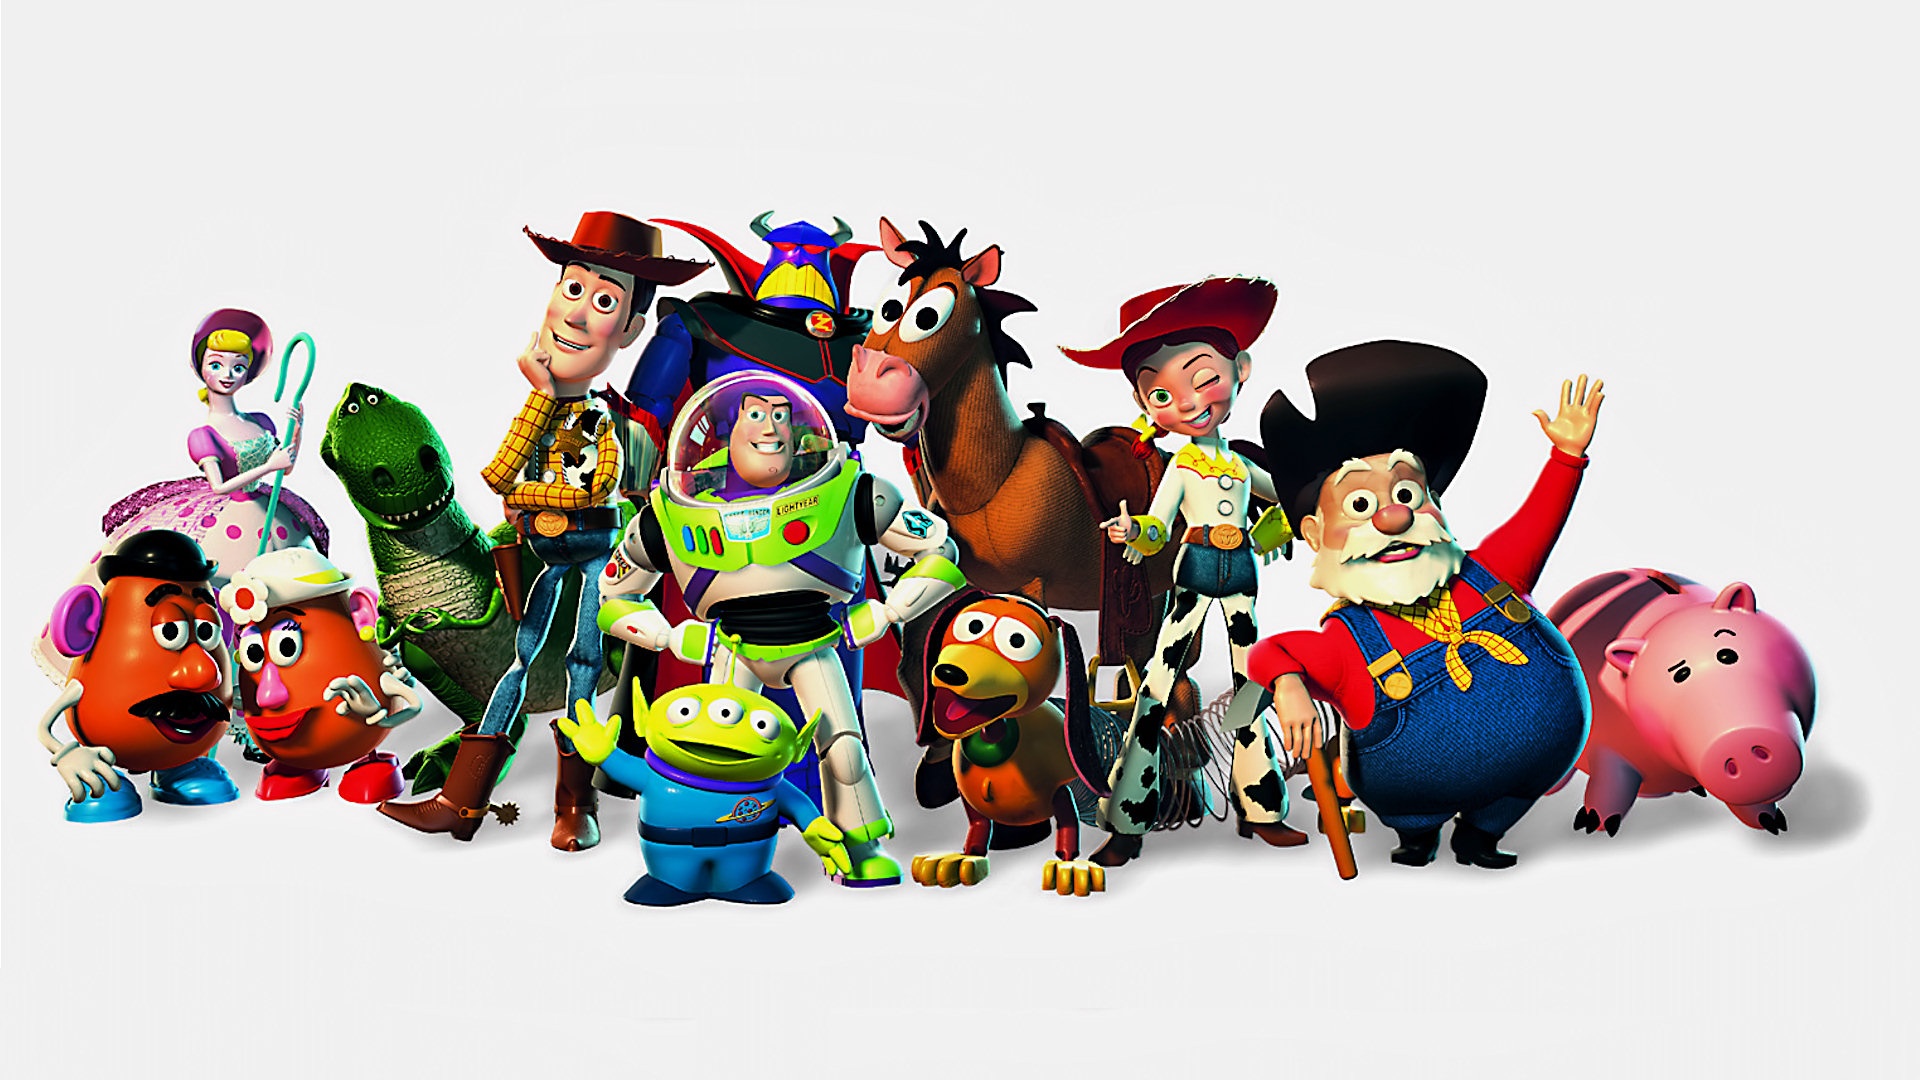 the toy story characters